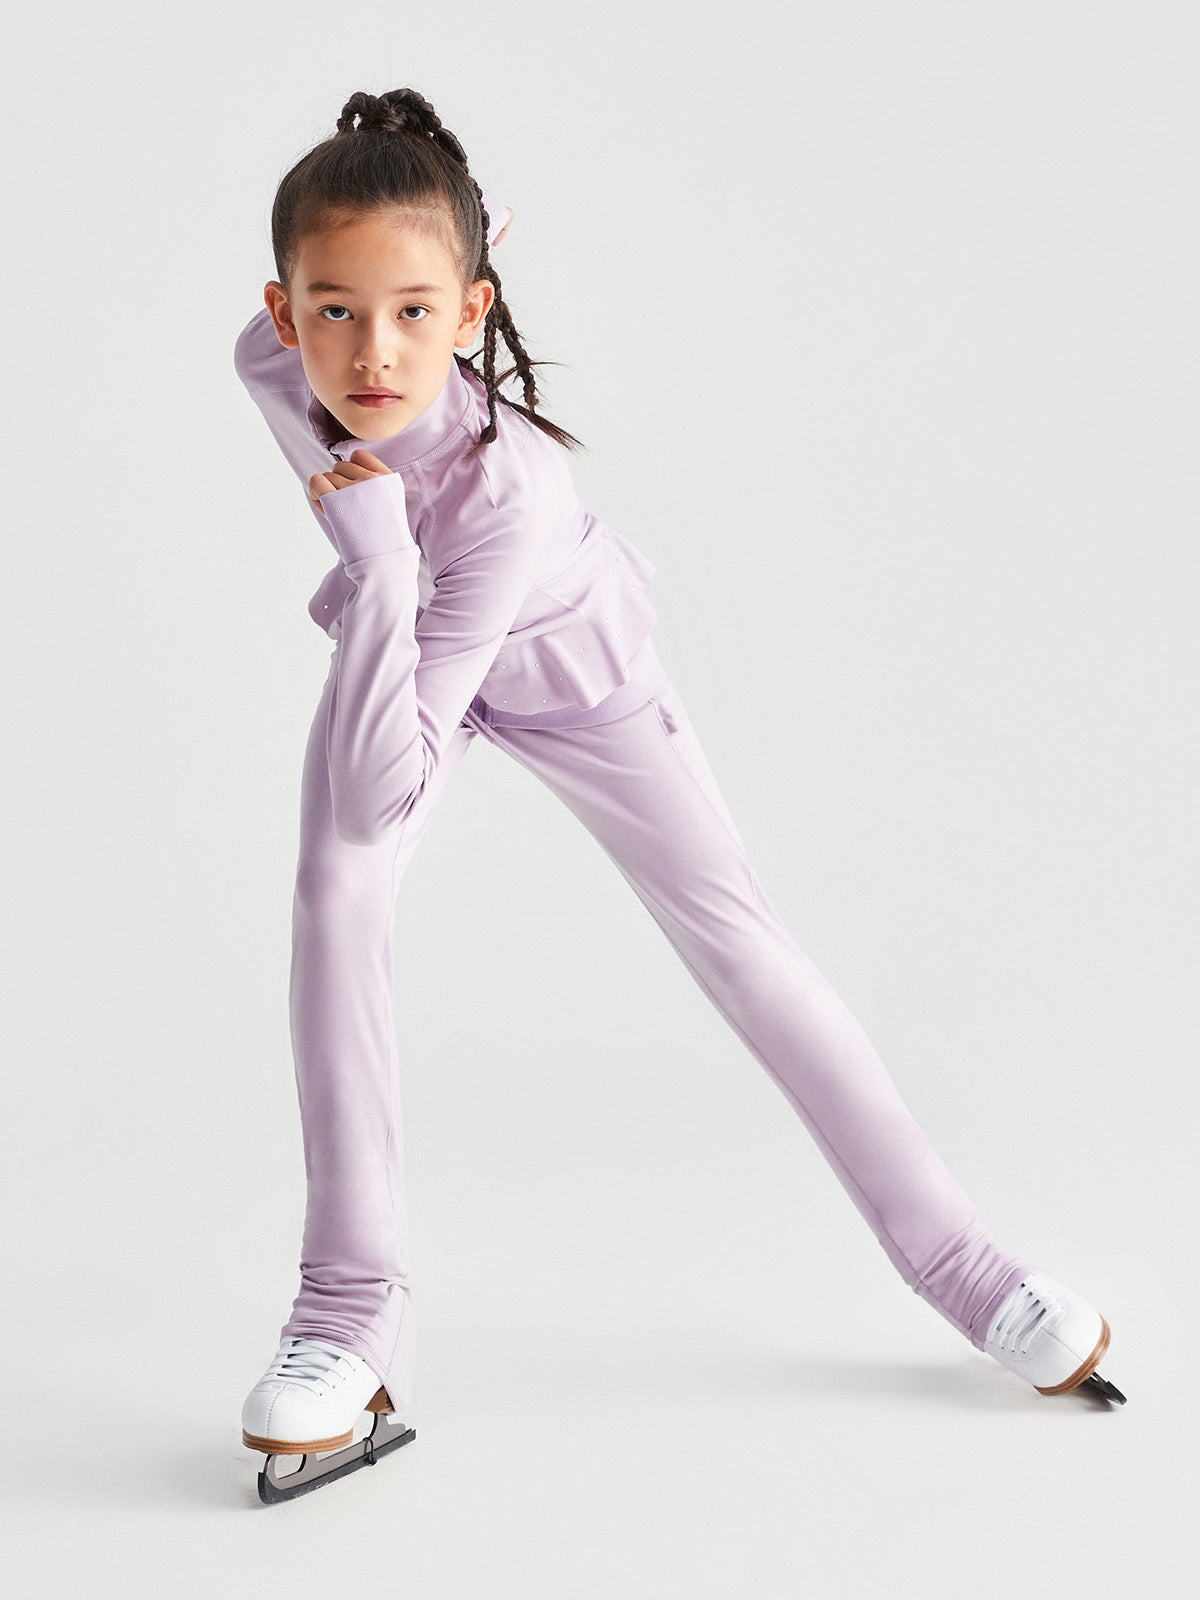  Figure Skating Pants 4t 5t Soft Solid Black Durable Girls Ice  Leggings for Little Kids Training Wear : Clothing, Shoes & Jewelry